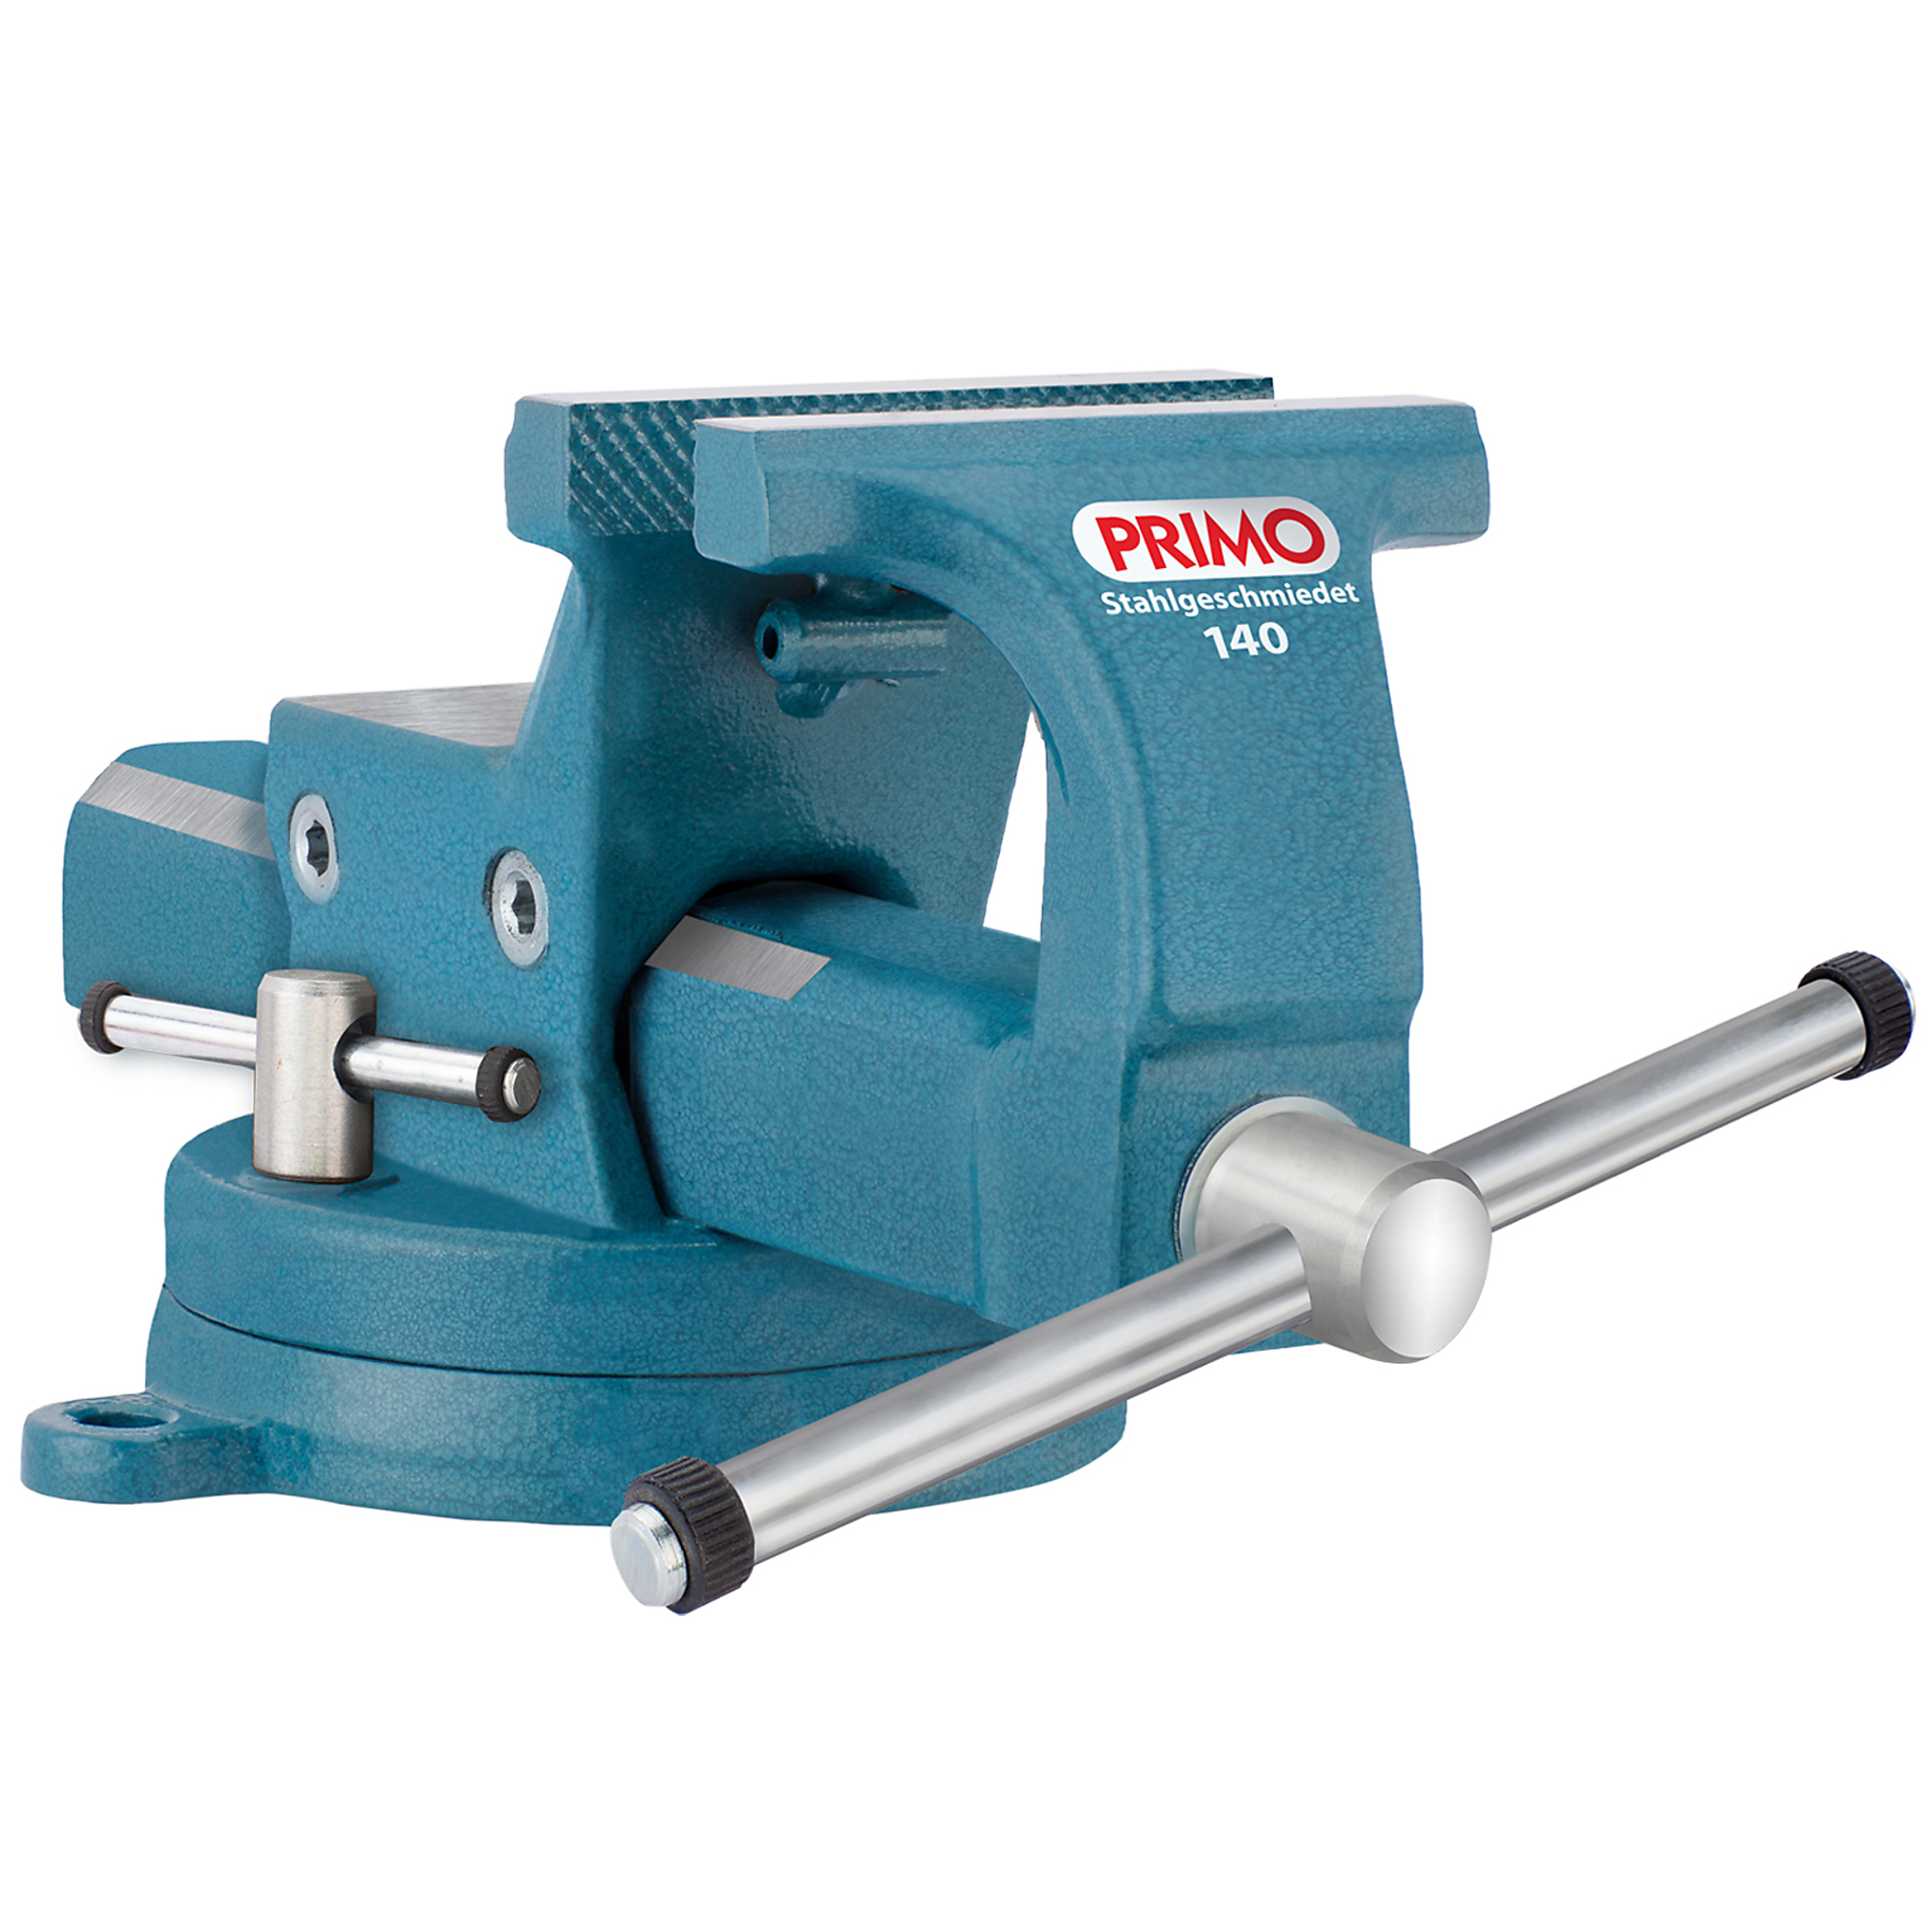 KANCA, PRIMO BENCH VISE w. SWIVEL BASE 140 MM - 5.6Inch, Jaw Width 5.6 in, Jaw Capacity 7.5 in, Model Primo Bench Vise